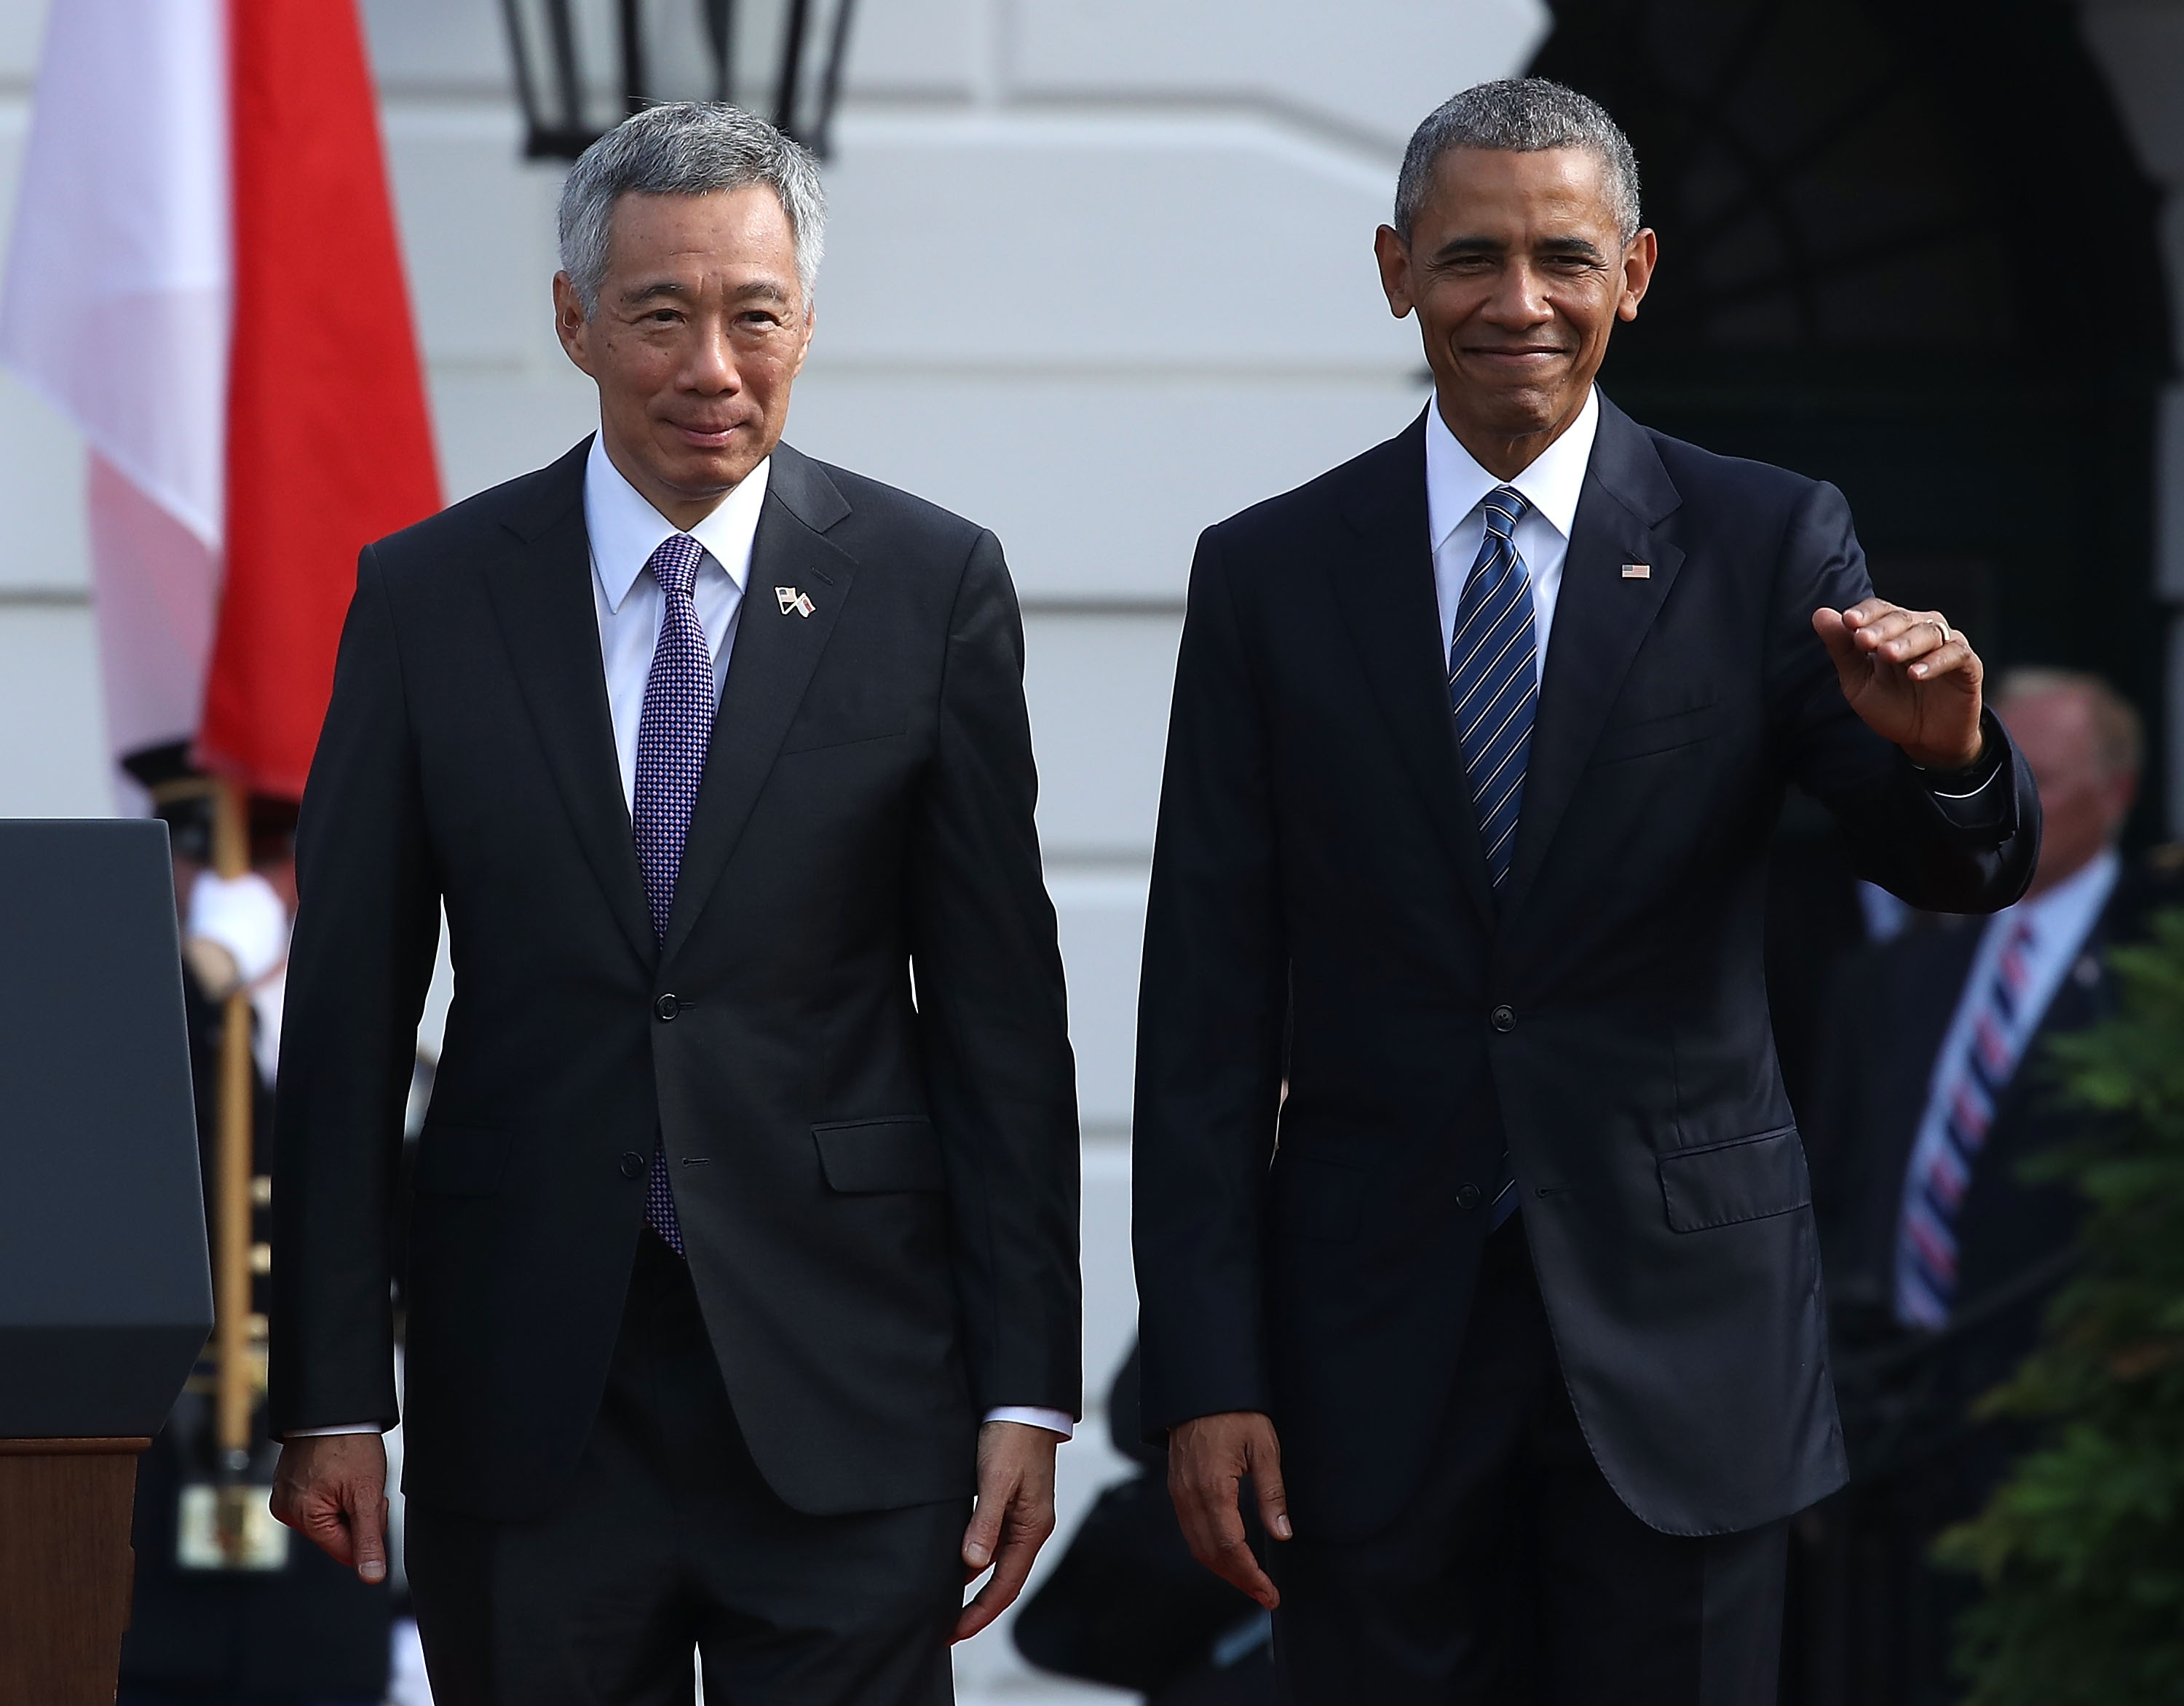 WASHINGTON, DC - AUGUST 02: U.S. President Barack Obama (R) welcomes Singapore Prime Minister Lee Hsien Loong during an arrival ceremony on the South Lawn of the White House August 2, 2016 in Washington, DC. The president and first lady Michelle Obama will host a state dinner in Loong's honor, just the 11th state dinner thrown since Obama became president. (Photo by Mark Wilson/Getty Images)